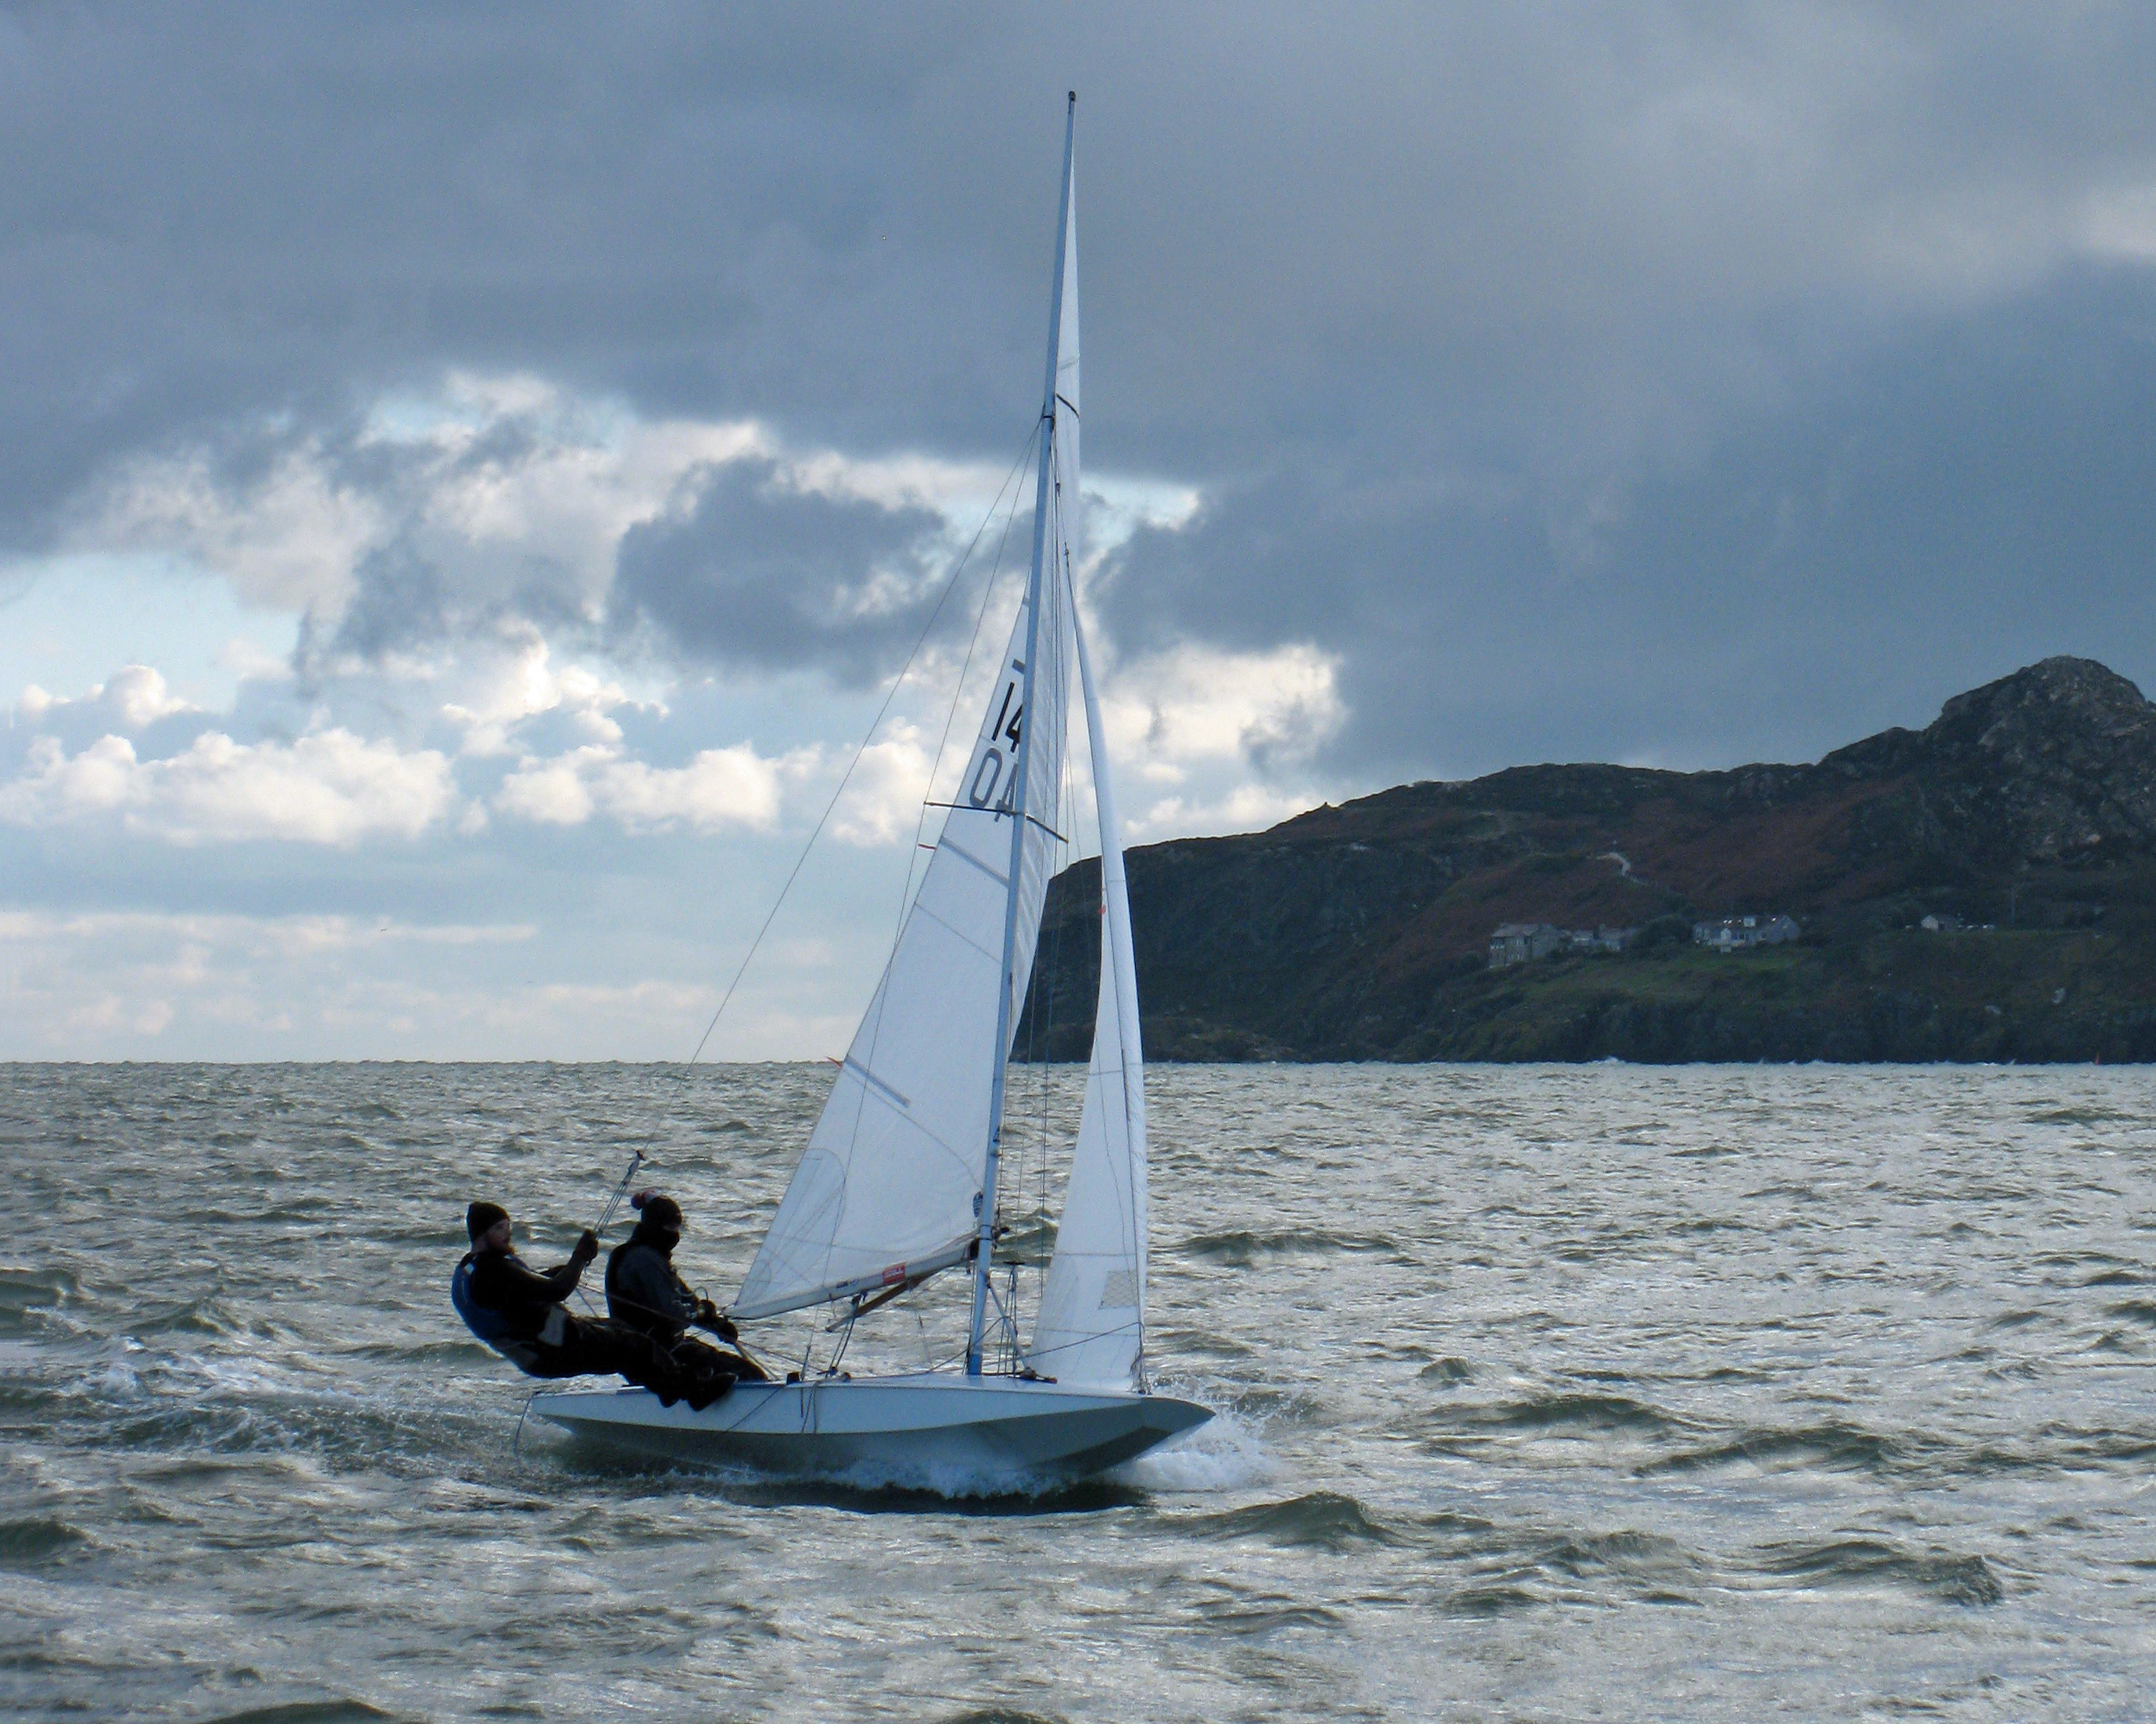 Hugo Micka and crew (Howth YC), leaders of the PY event in their Fireball